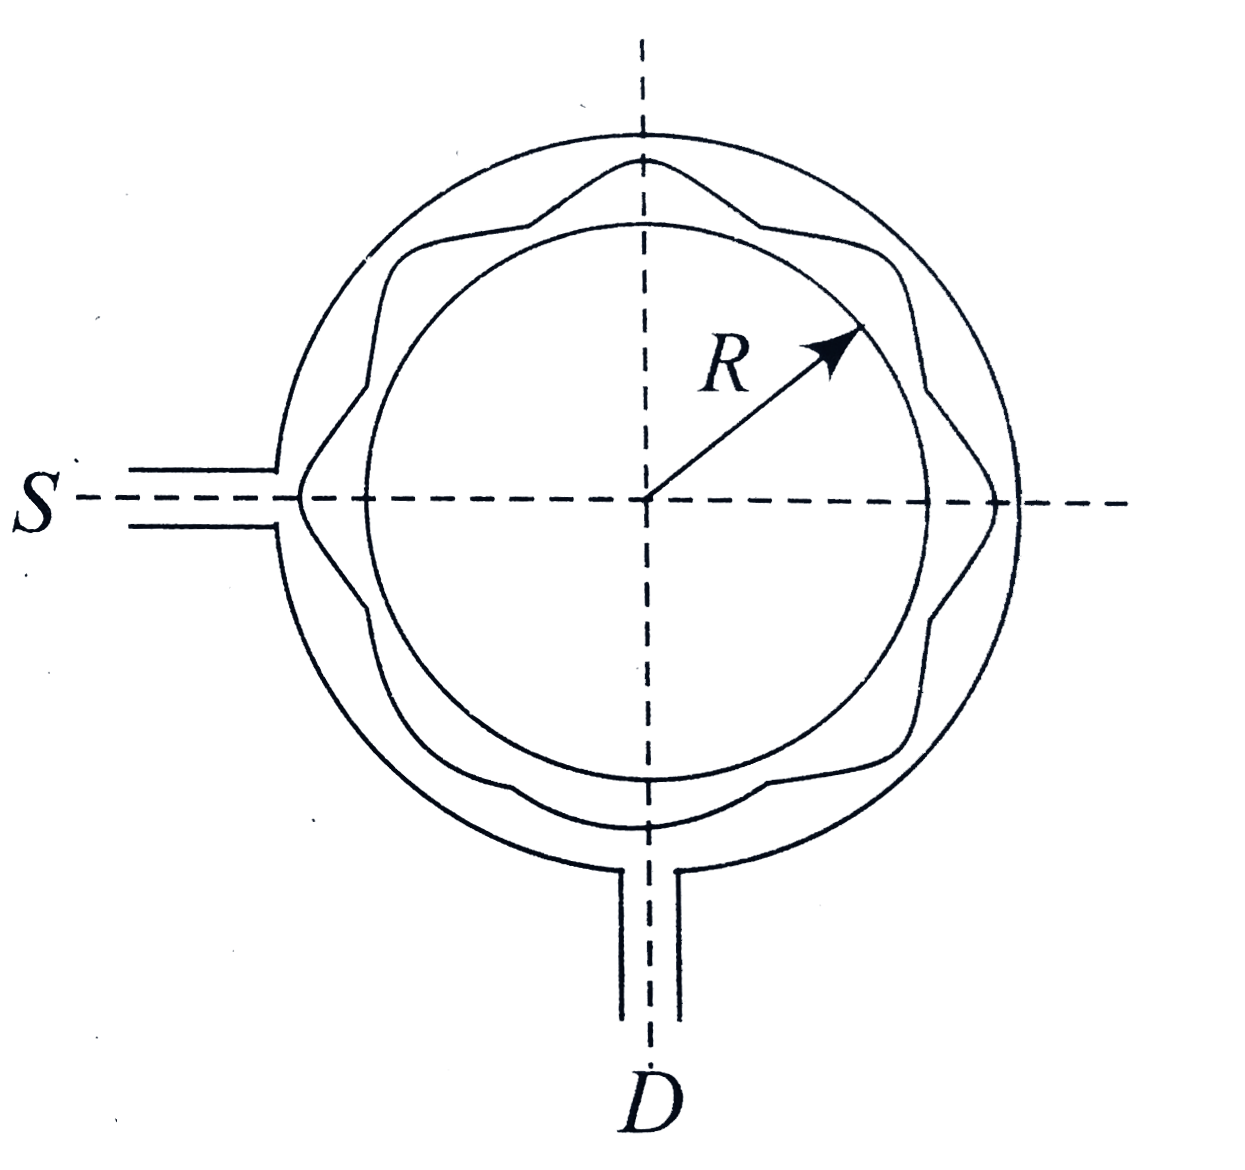 A narrow tube is bent in the form of a circle of radius R, as shown in figure. Two small holes S and D are made in the tube at the position at right angle to each other. A source placed at S generates a wave of intensity I(0) which two parts: one part travels along the longer path,  while the other travels along the shorter path. Both the waves meet at point D where a detector is placed.     The maximum intensity produced at D is given by